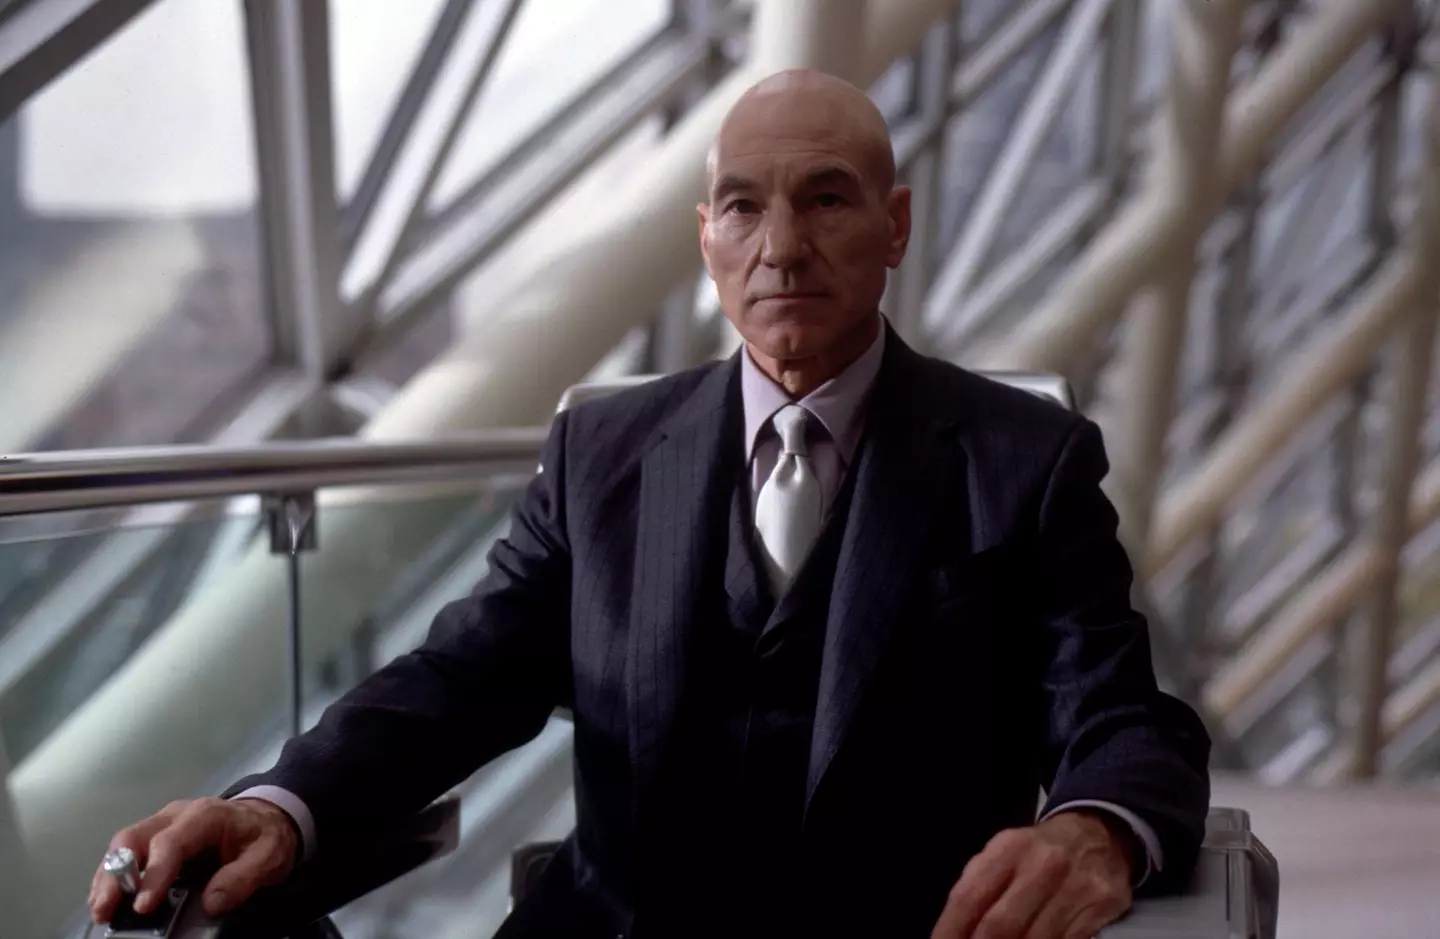 The preview has fuelled fresh speculation about Professor X.